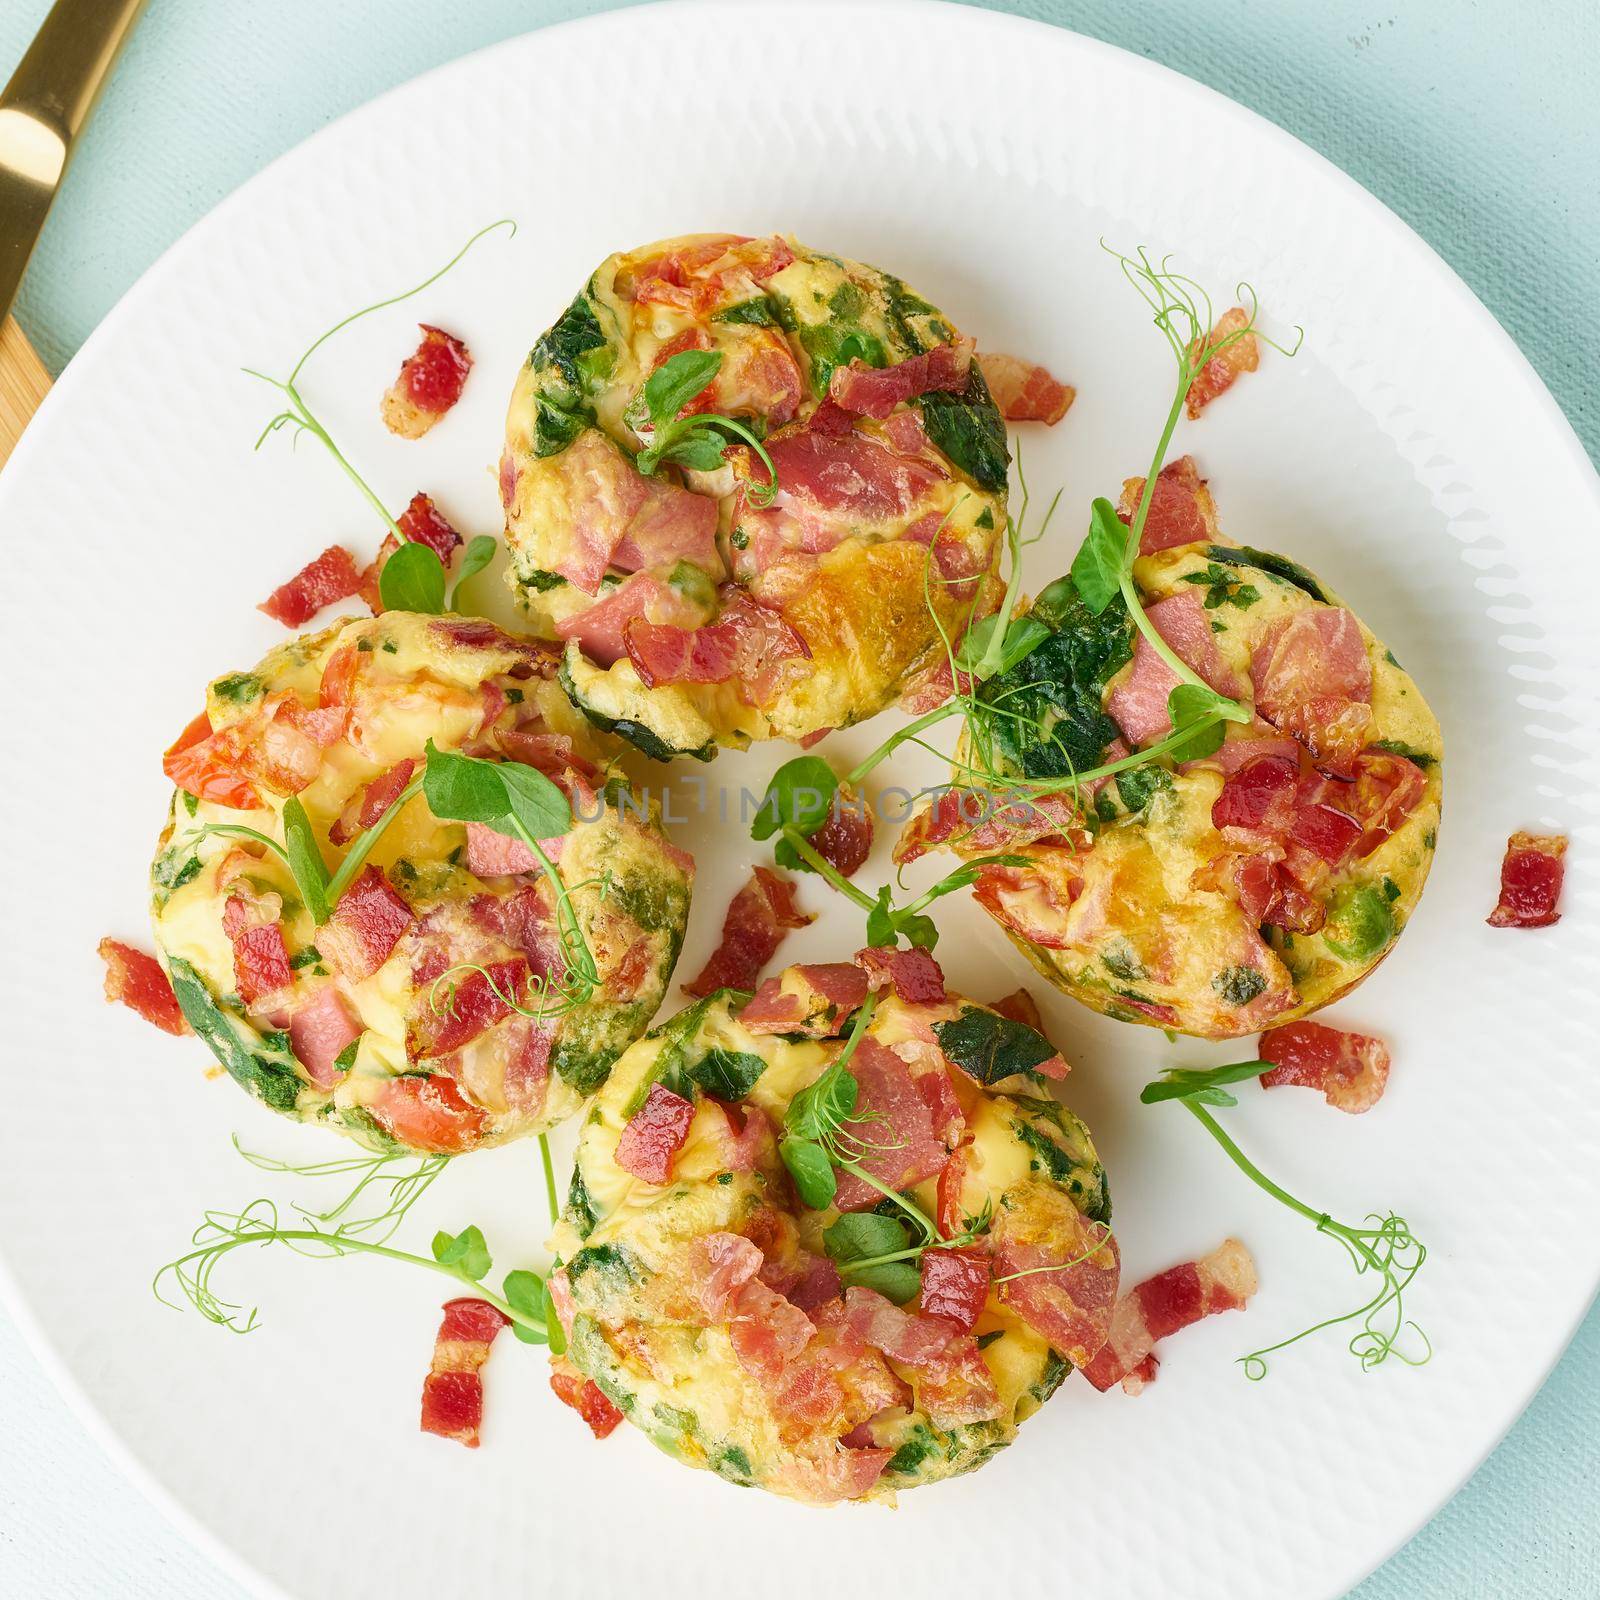 egg muffins with spinach and bacon, ketogenic keto diet low carb, pastel and modern background closeup